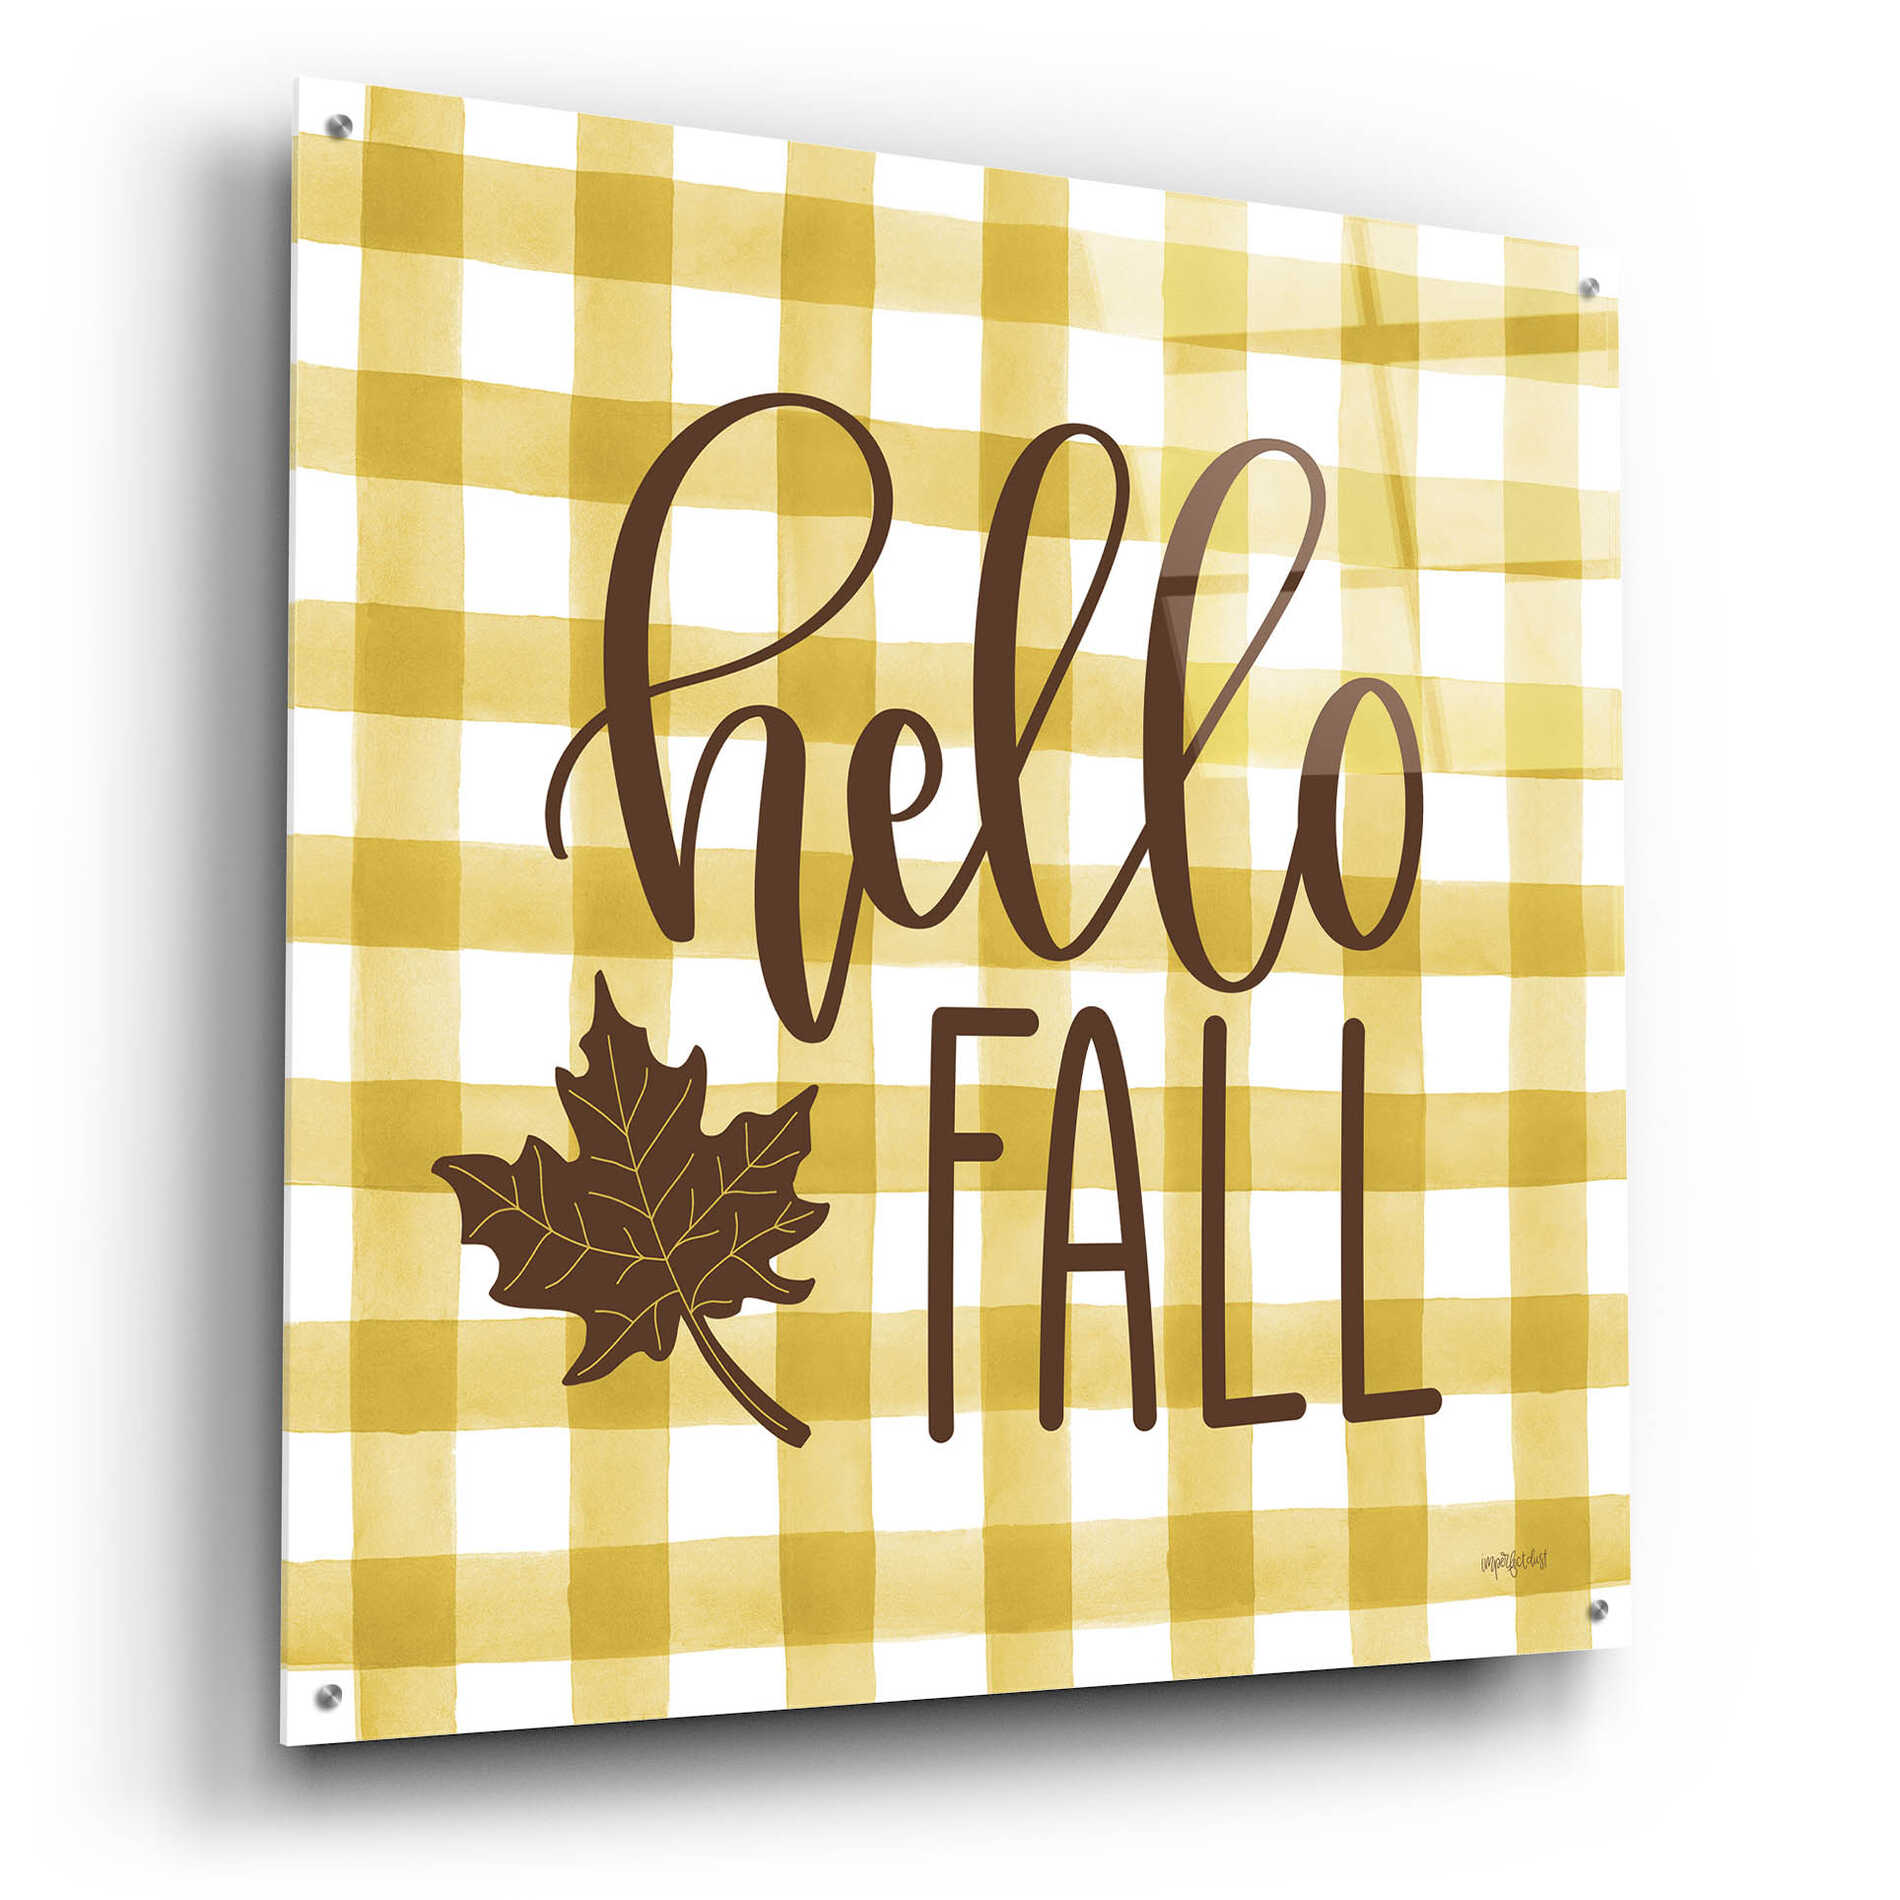 Epic Art 'Hello Fall' by Imperfect Dust, Acrylic Glass Wall Art,36x36